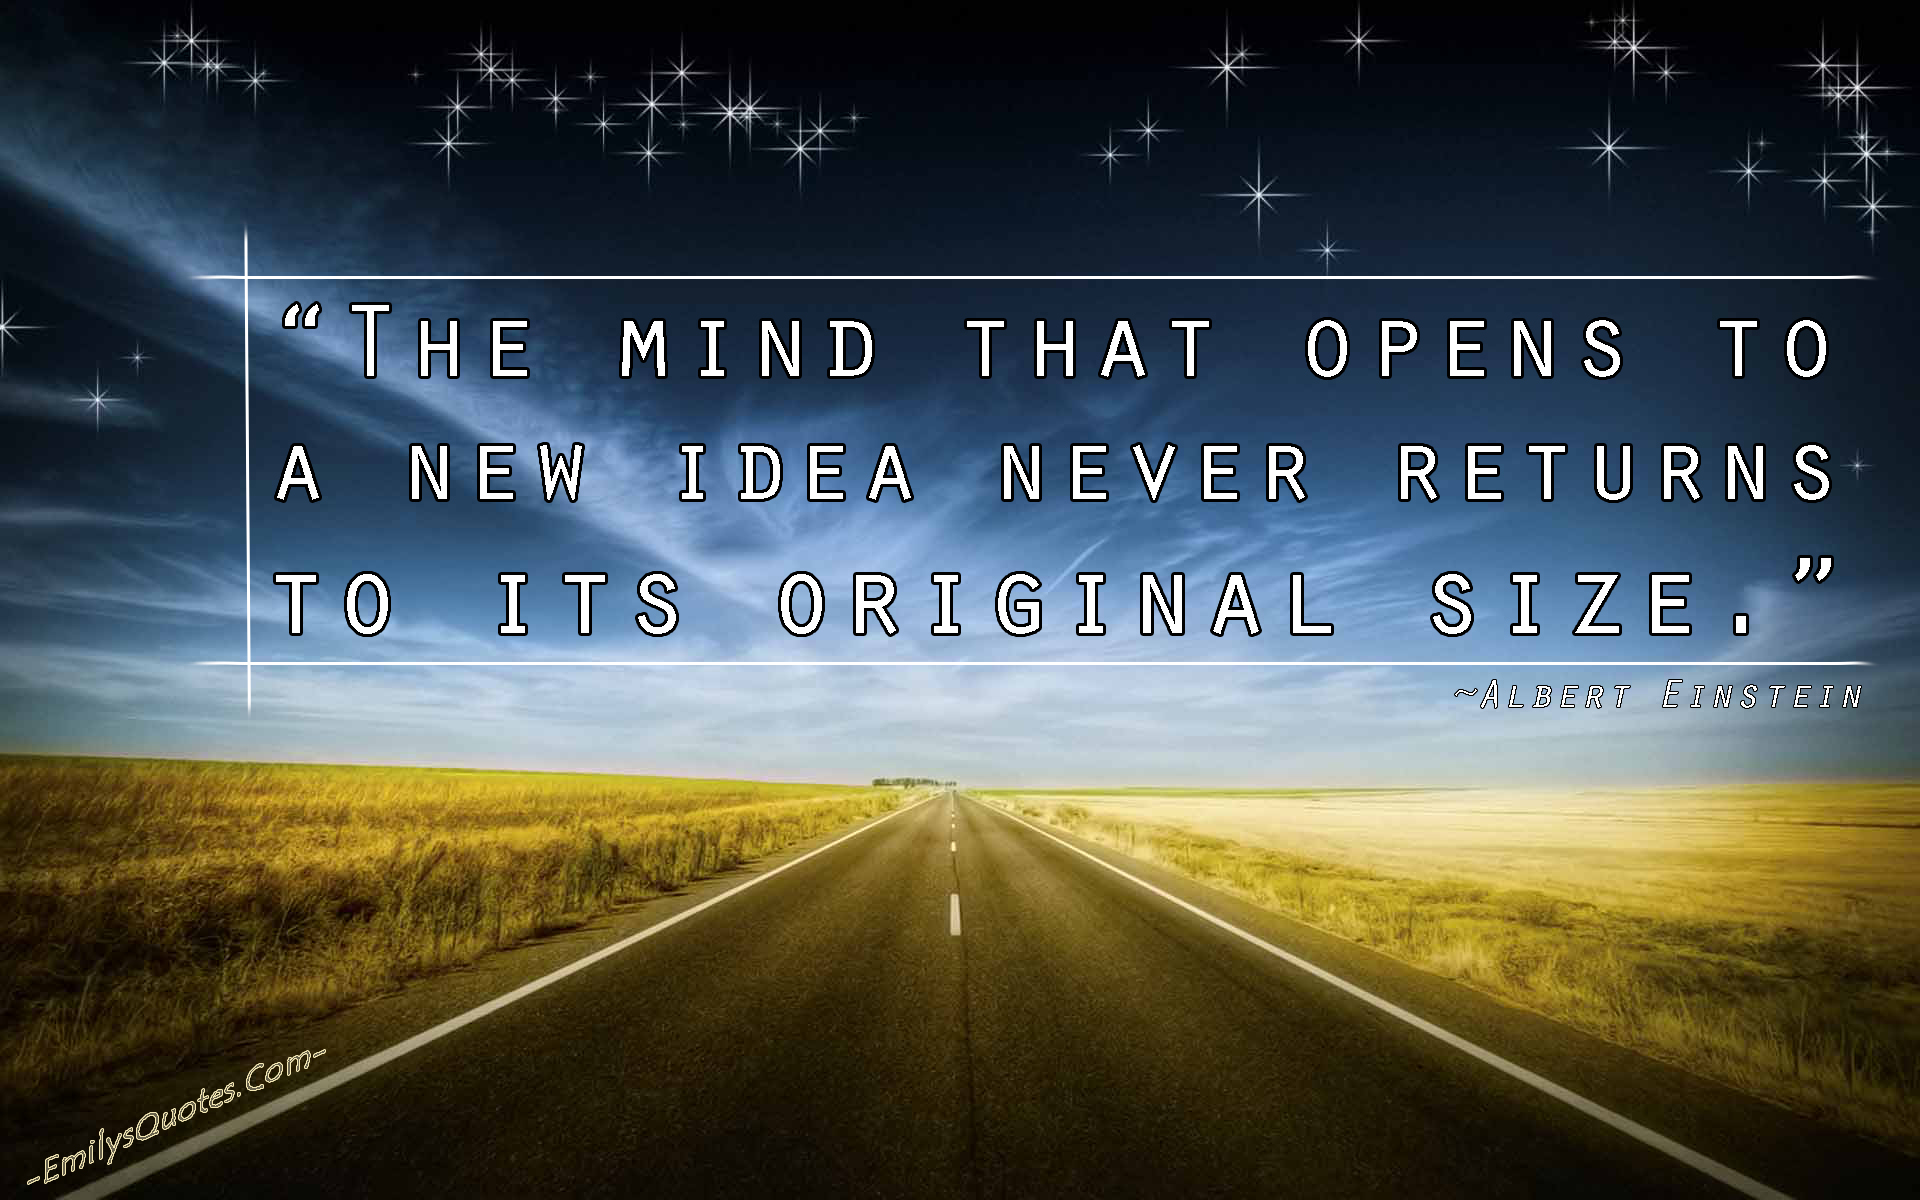 The mind that opens to a new idea never returns to its original size